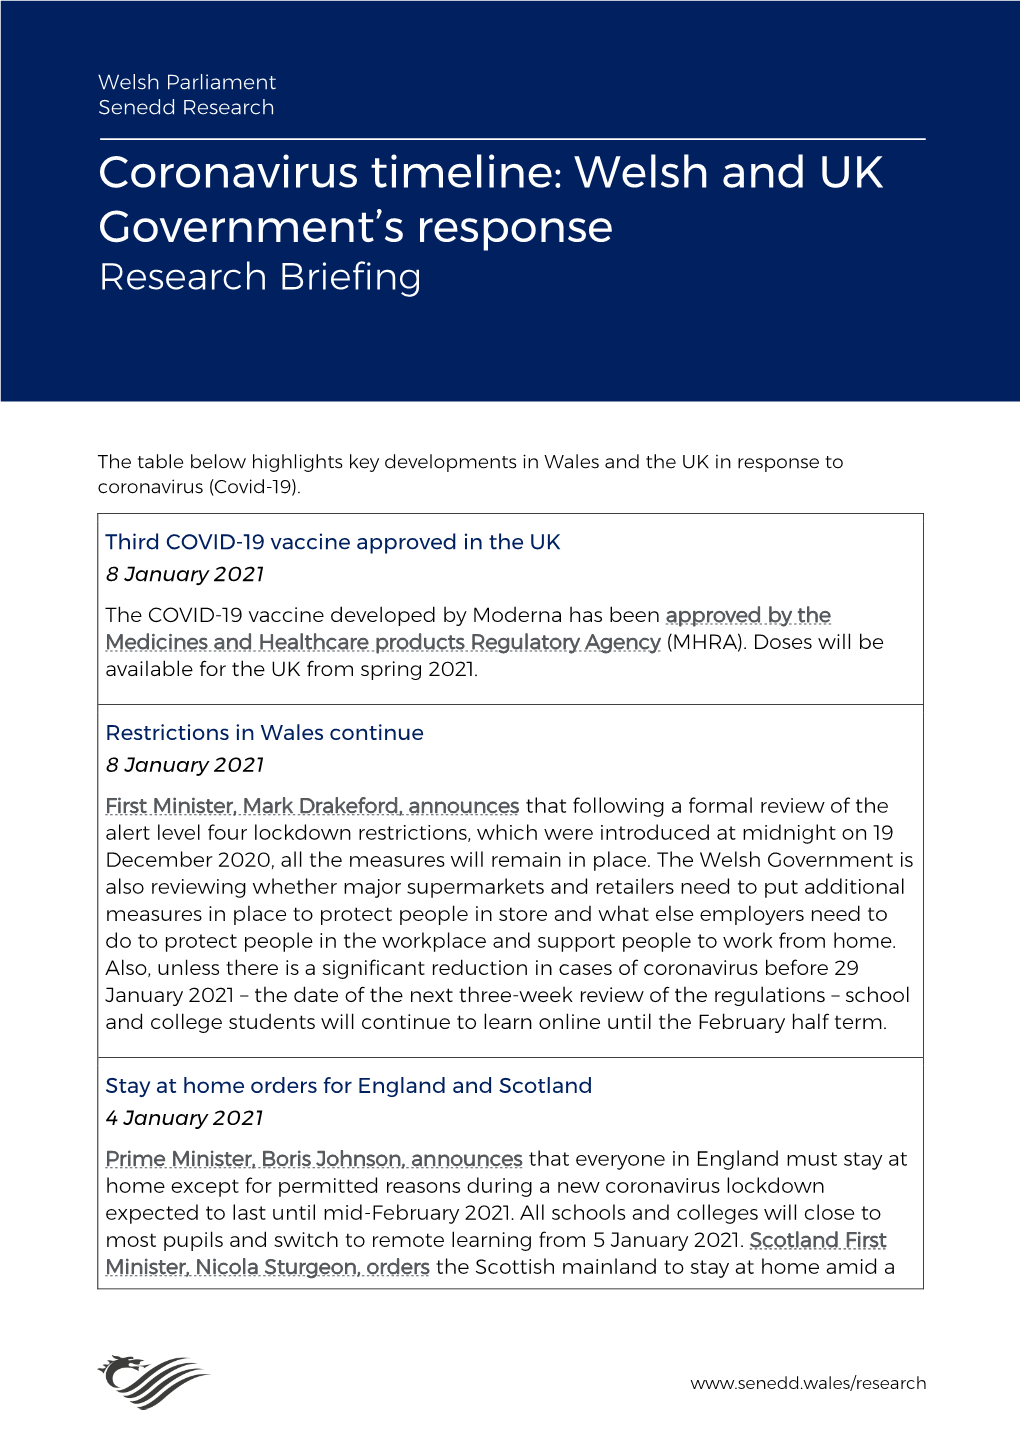 Coronavirus Timeline: Welsh and UK Government’S Response Research Briefing